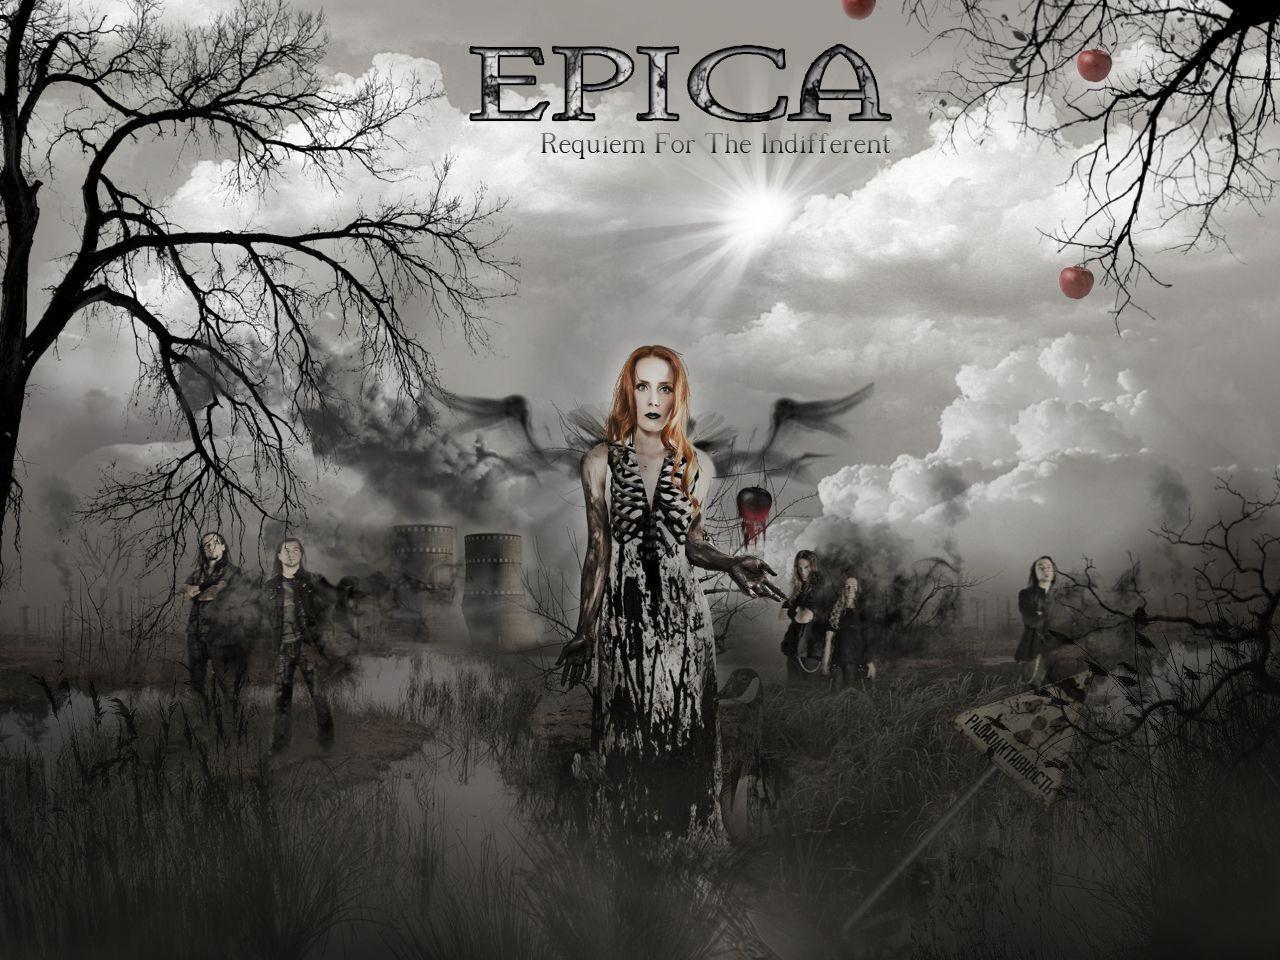 image about Epica and Simone. Posts, Dutch